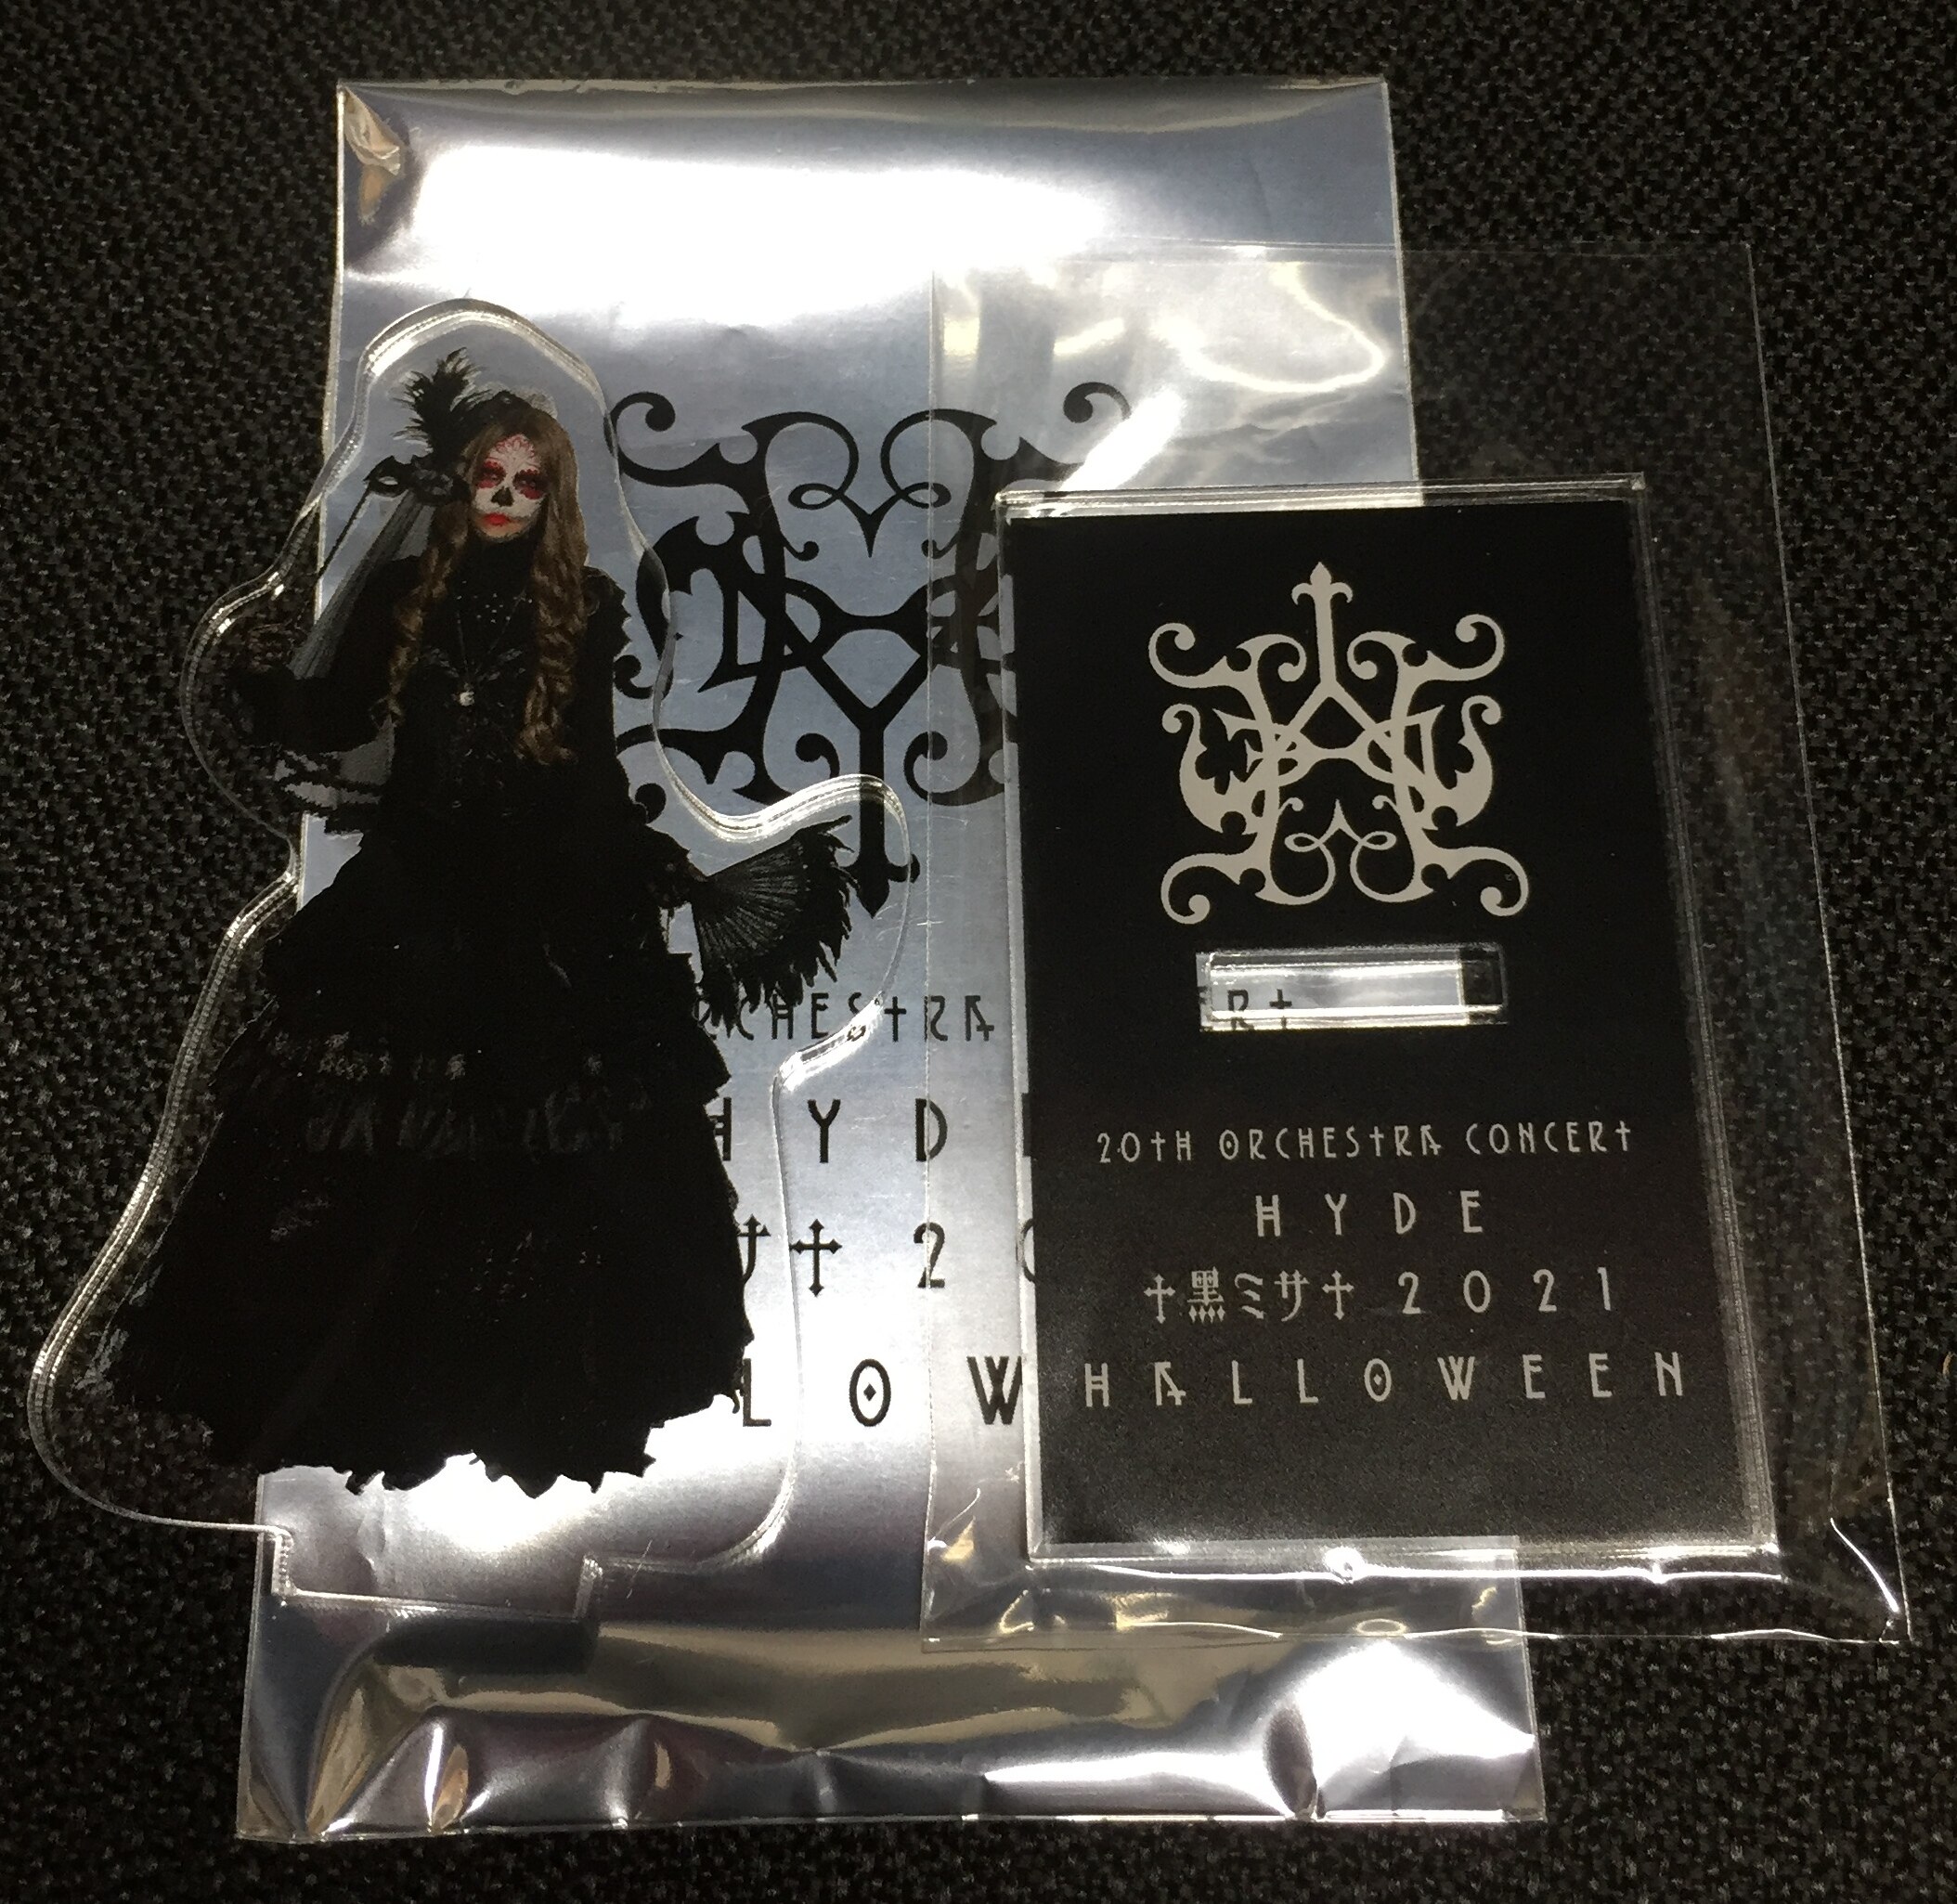 HYDE 20th Orchestra Concert HYDE 黒ミサ 2021 Halloween 歴代 HYDE 